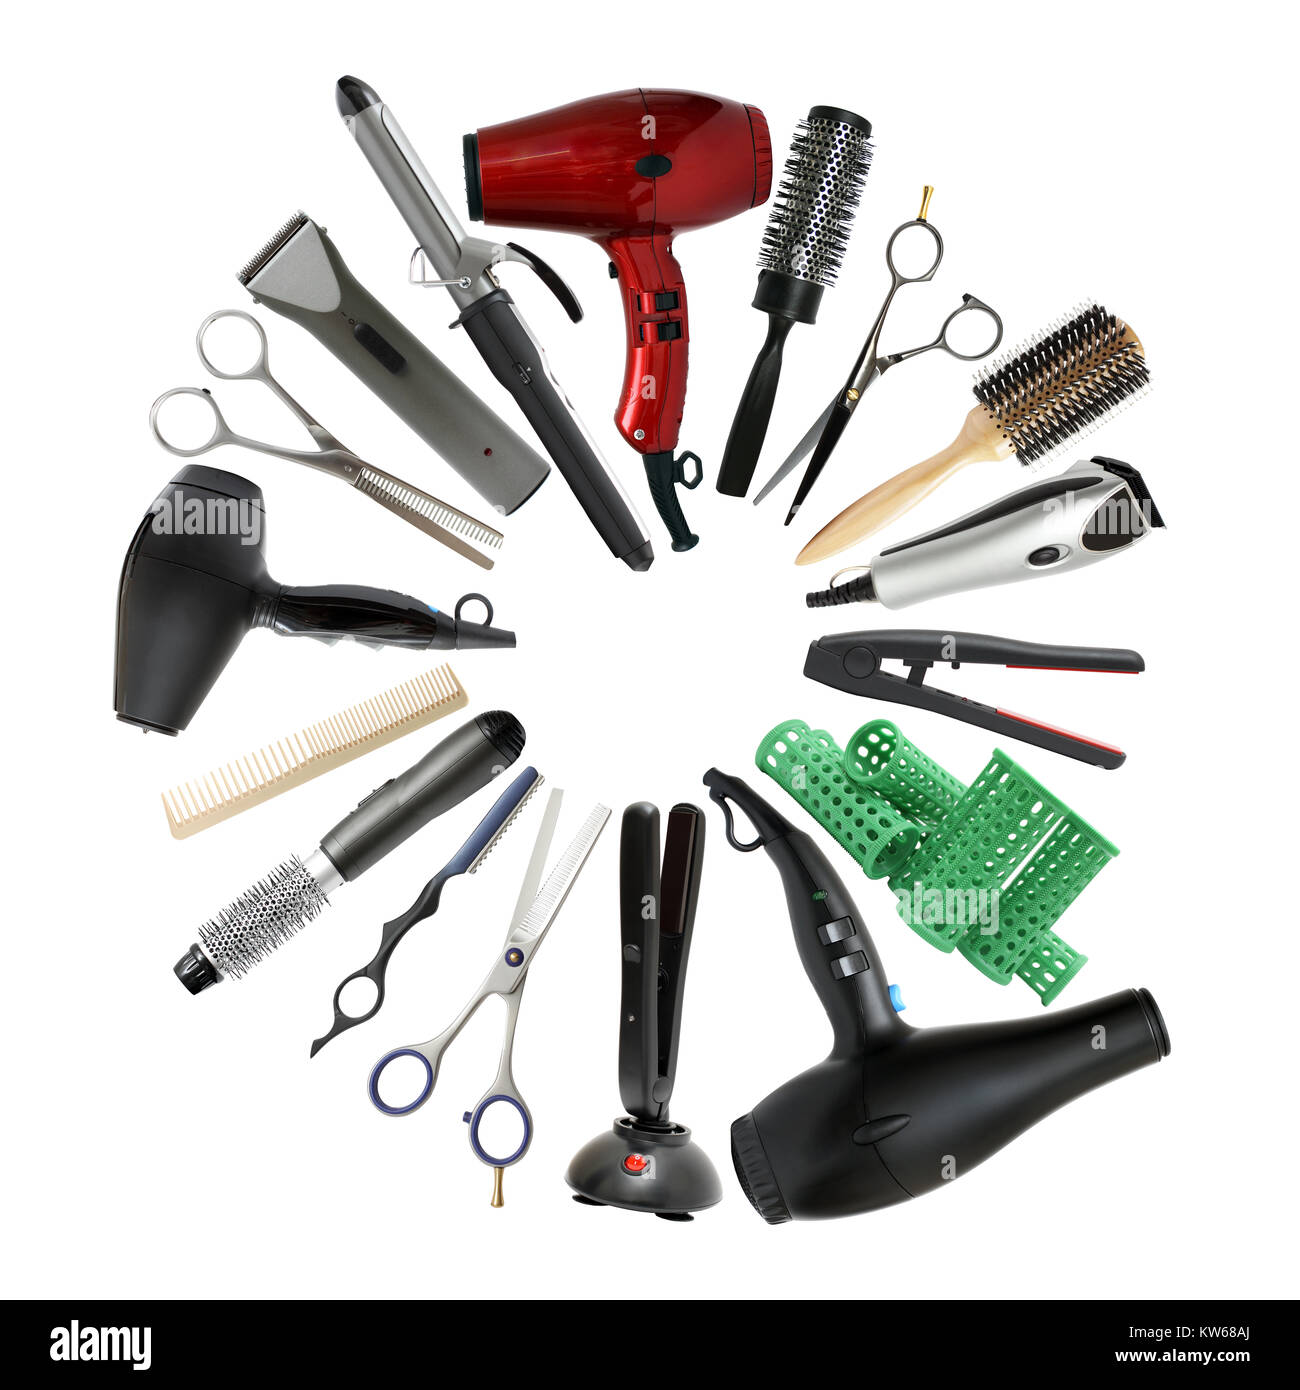 Professional Hairdressing Equipment Beauty Salon And Barbershop